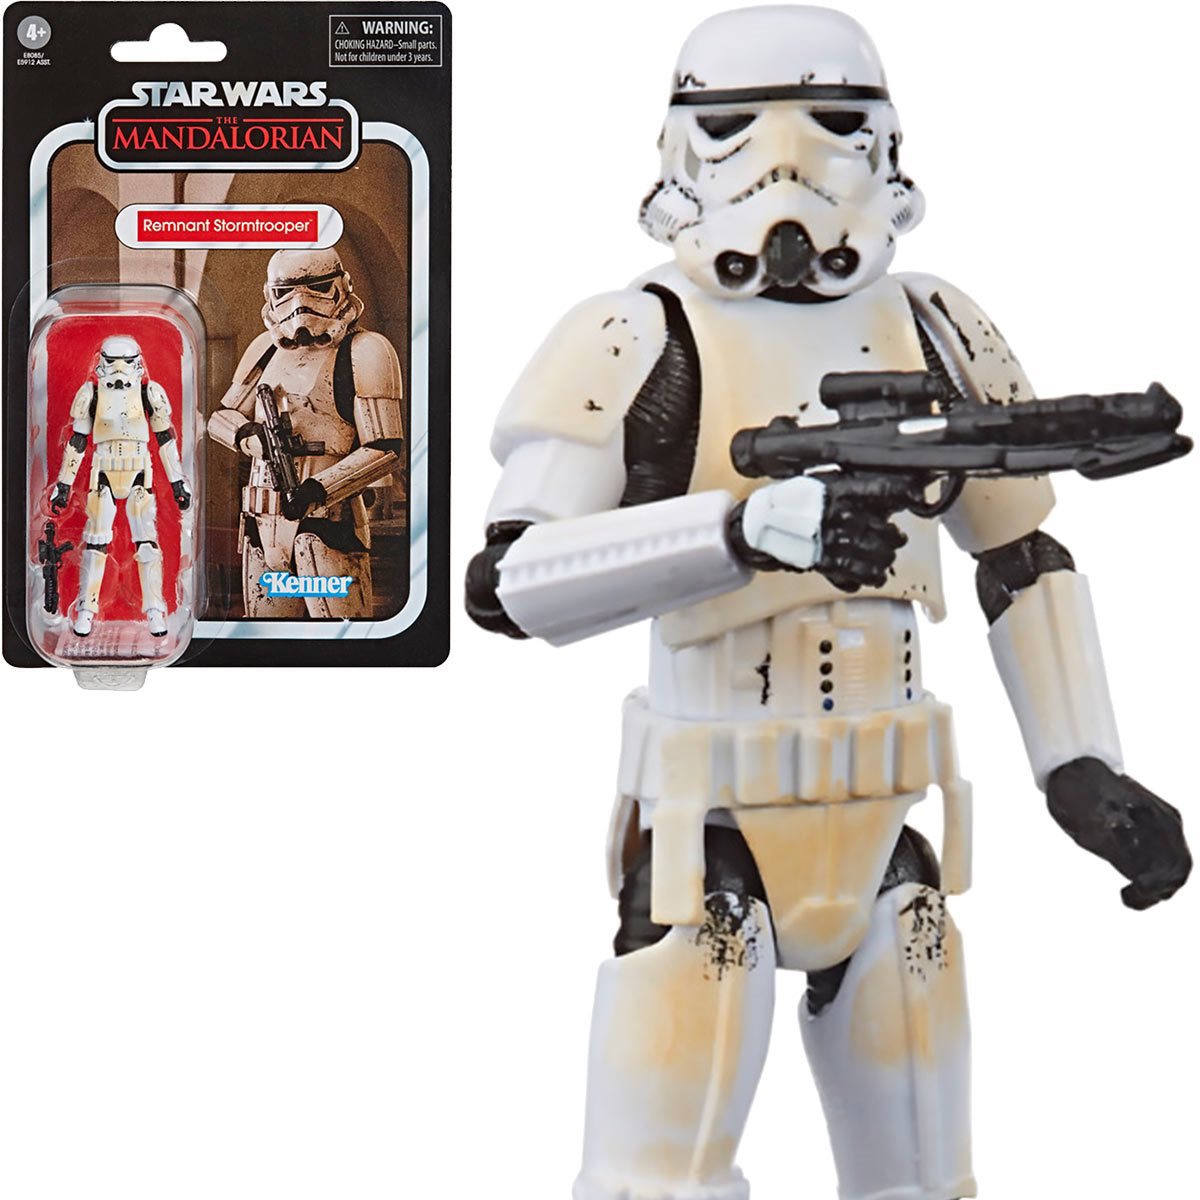 Hashbro Remnant Stormtrooper 10 inch Action Figure for sale online 